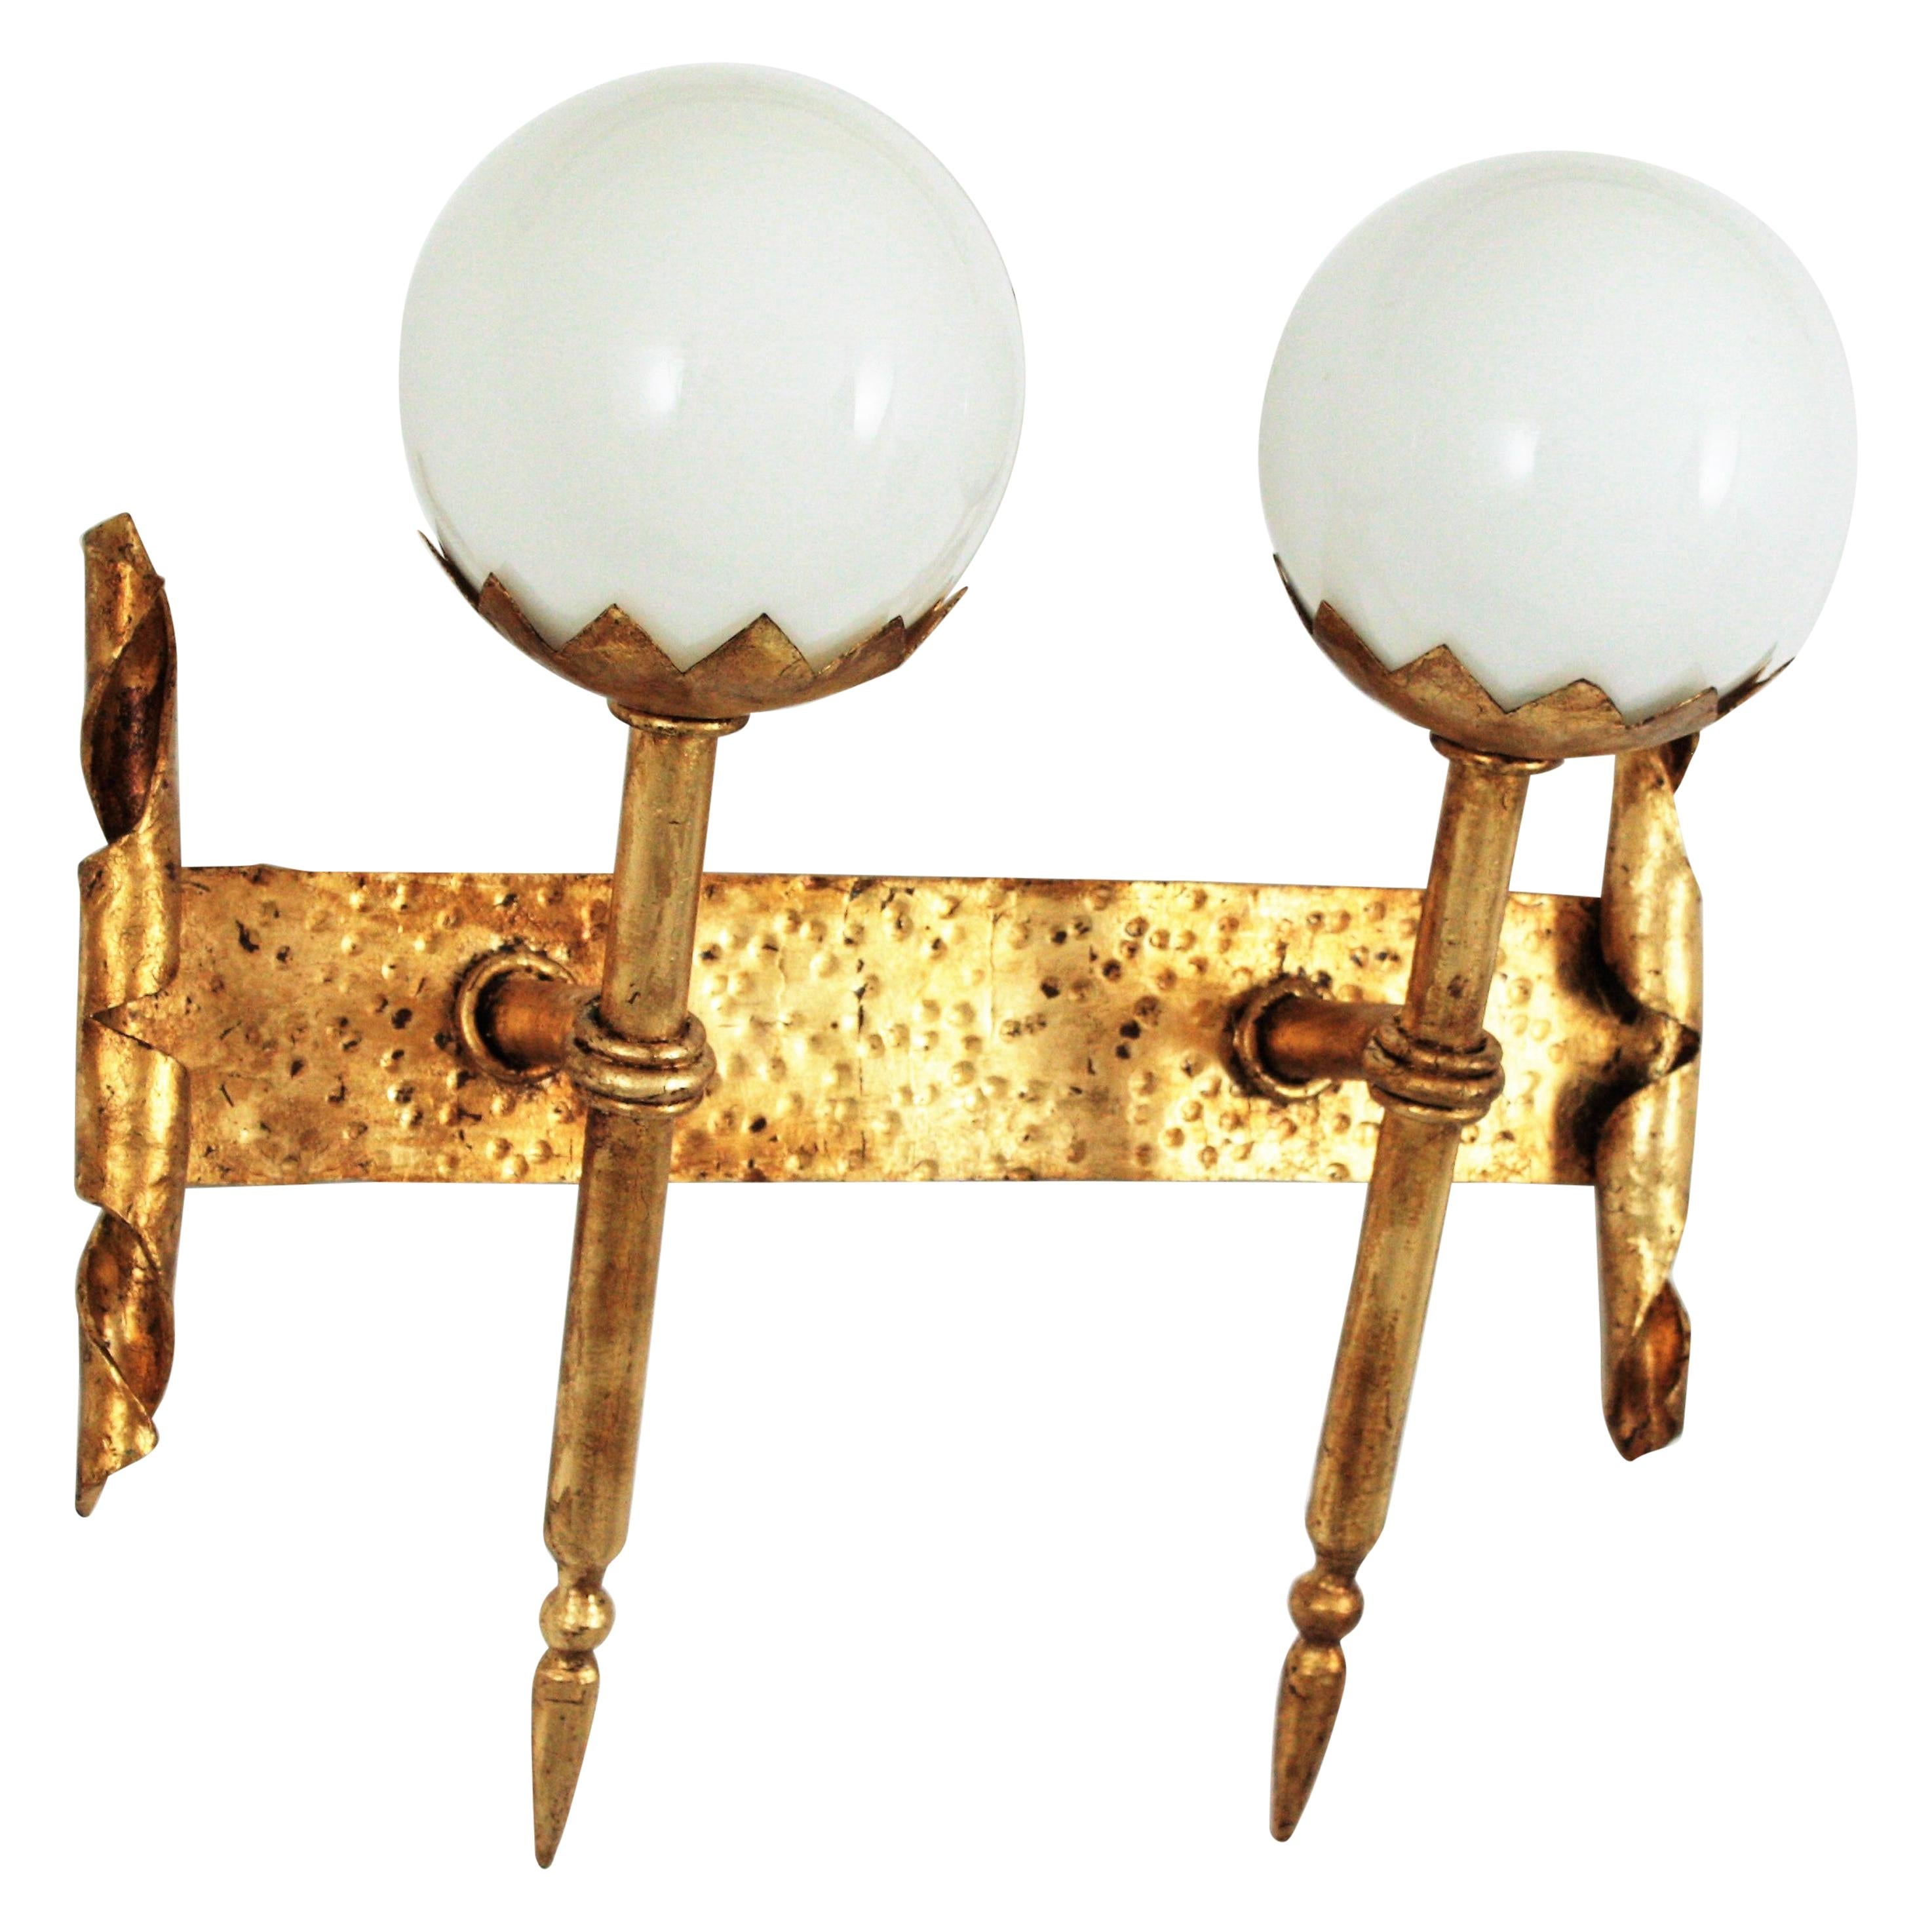 Gothic Revival Double Torch Wall Sconce in Wrought Iron with Milk Glass Globes